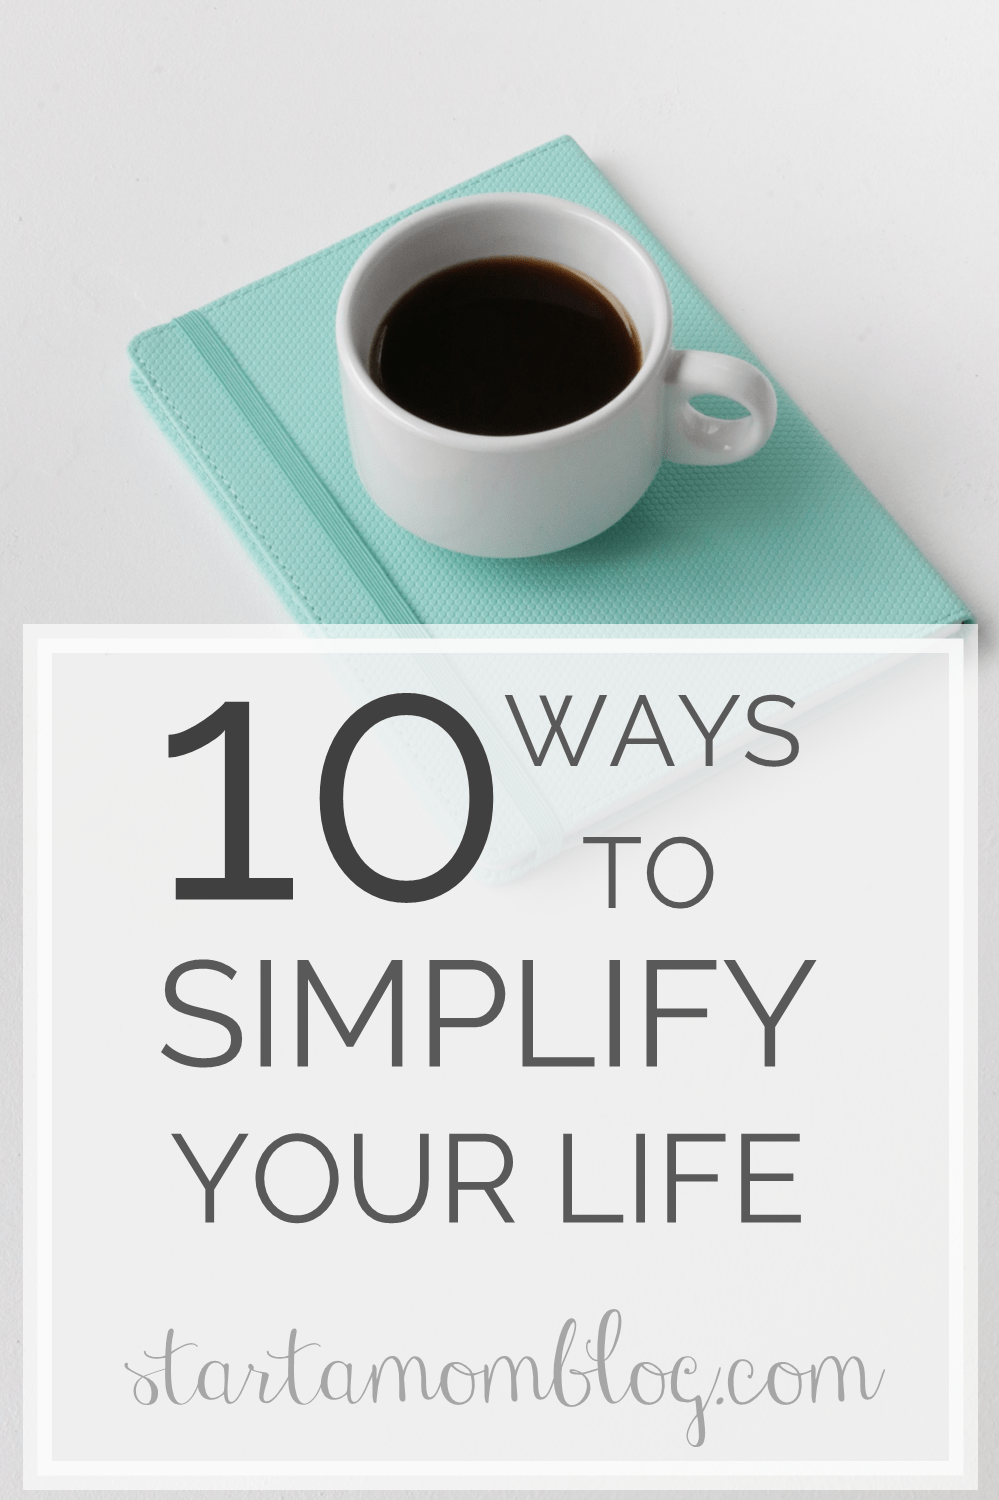 10-ways-to-simplify-your-life-start-a-mom-blog